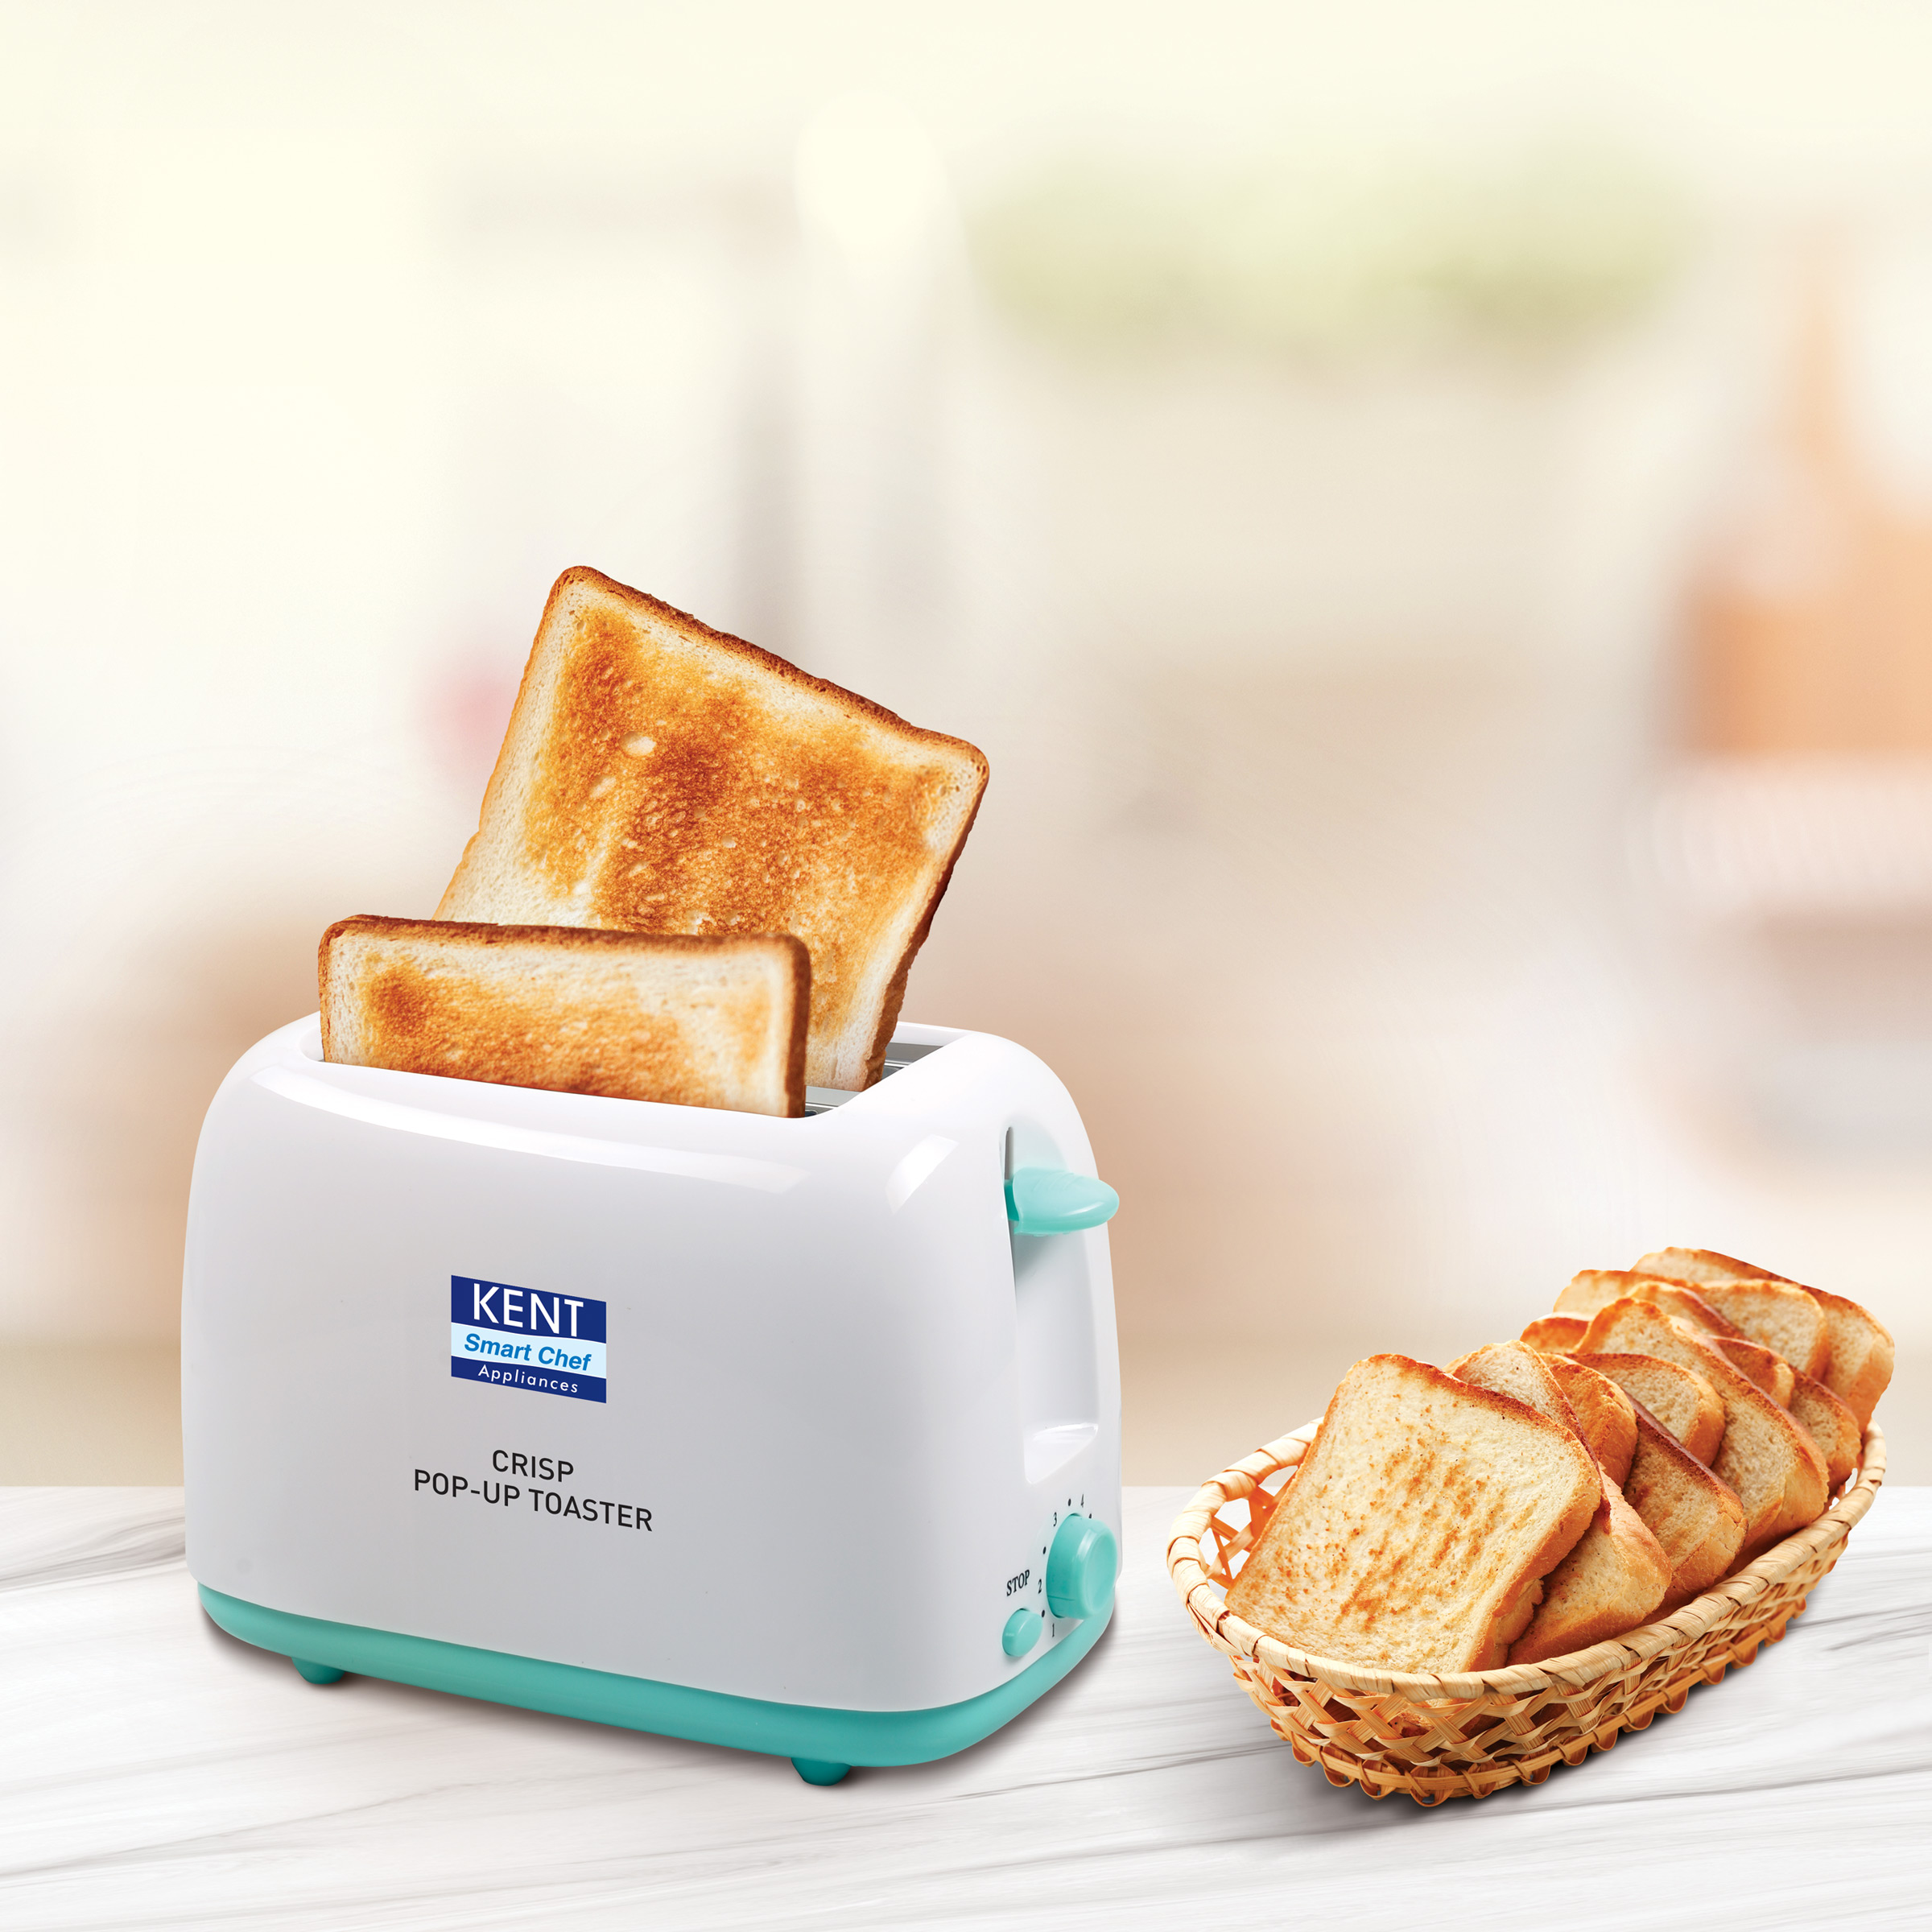 KENT Crisp Pop-Up Toaster: Buy Electric Bread Toaster at Best